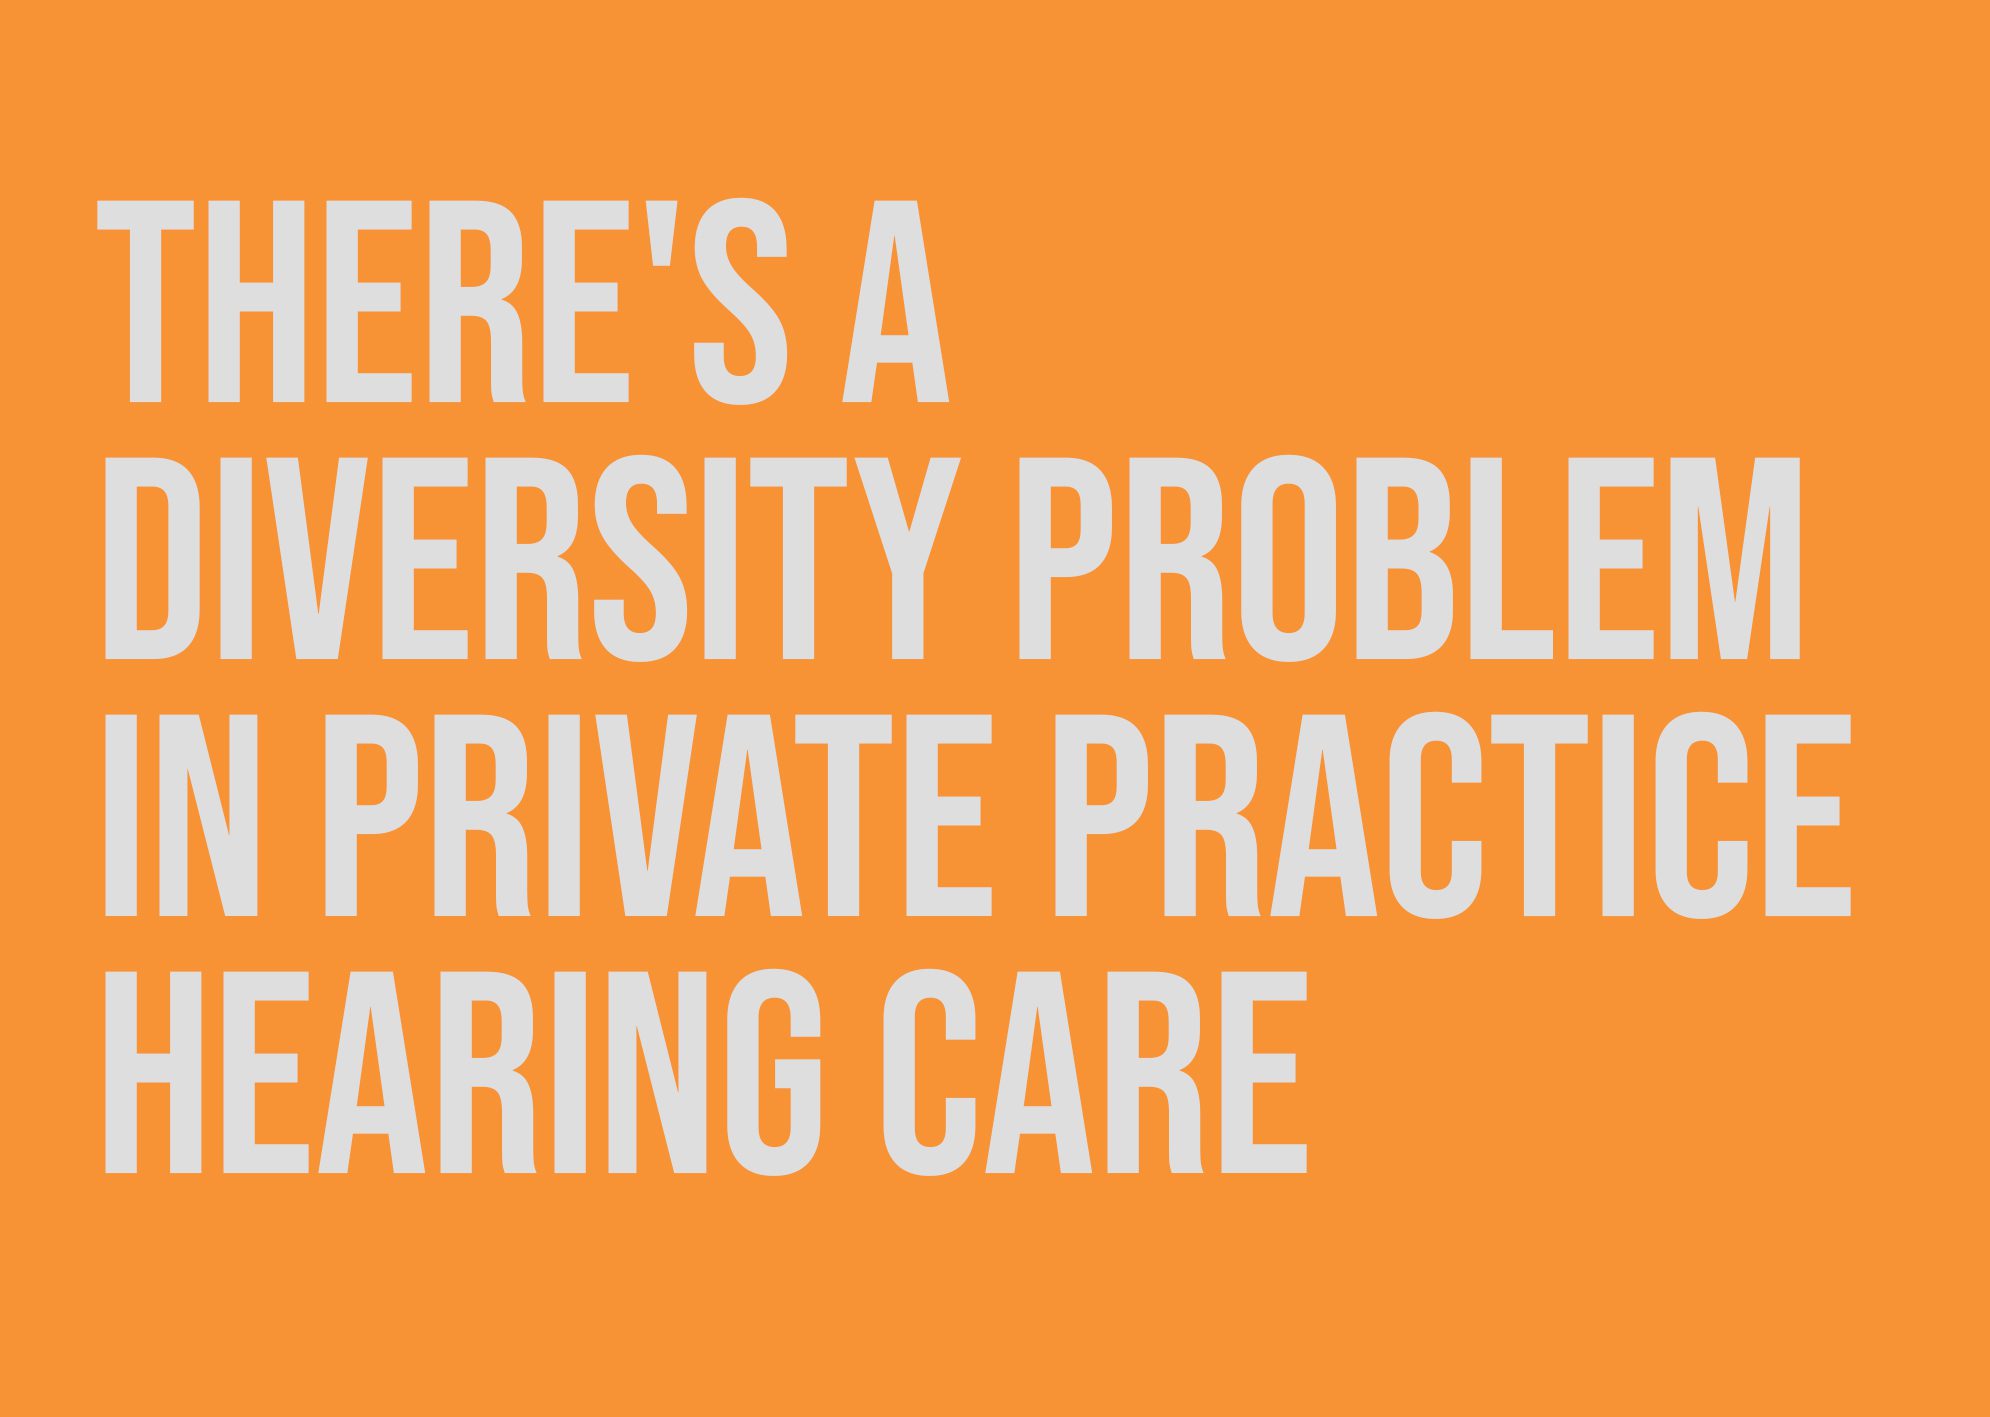 there's a diversity problem in private practice hearing care image